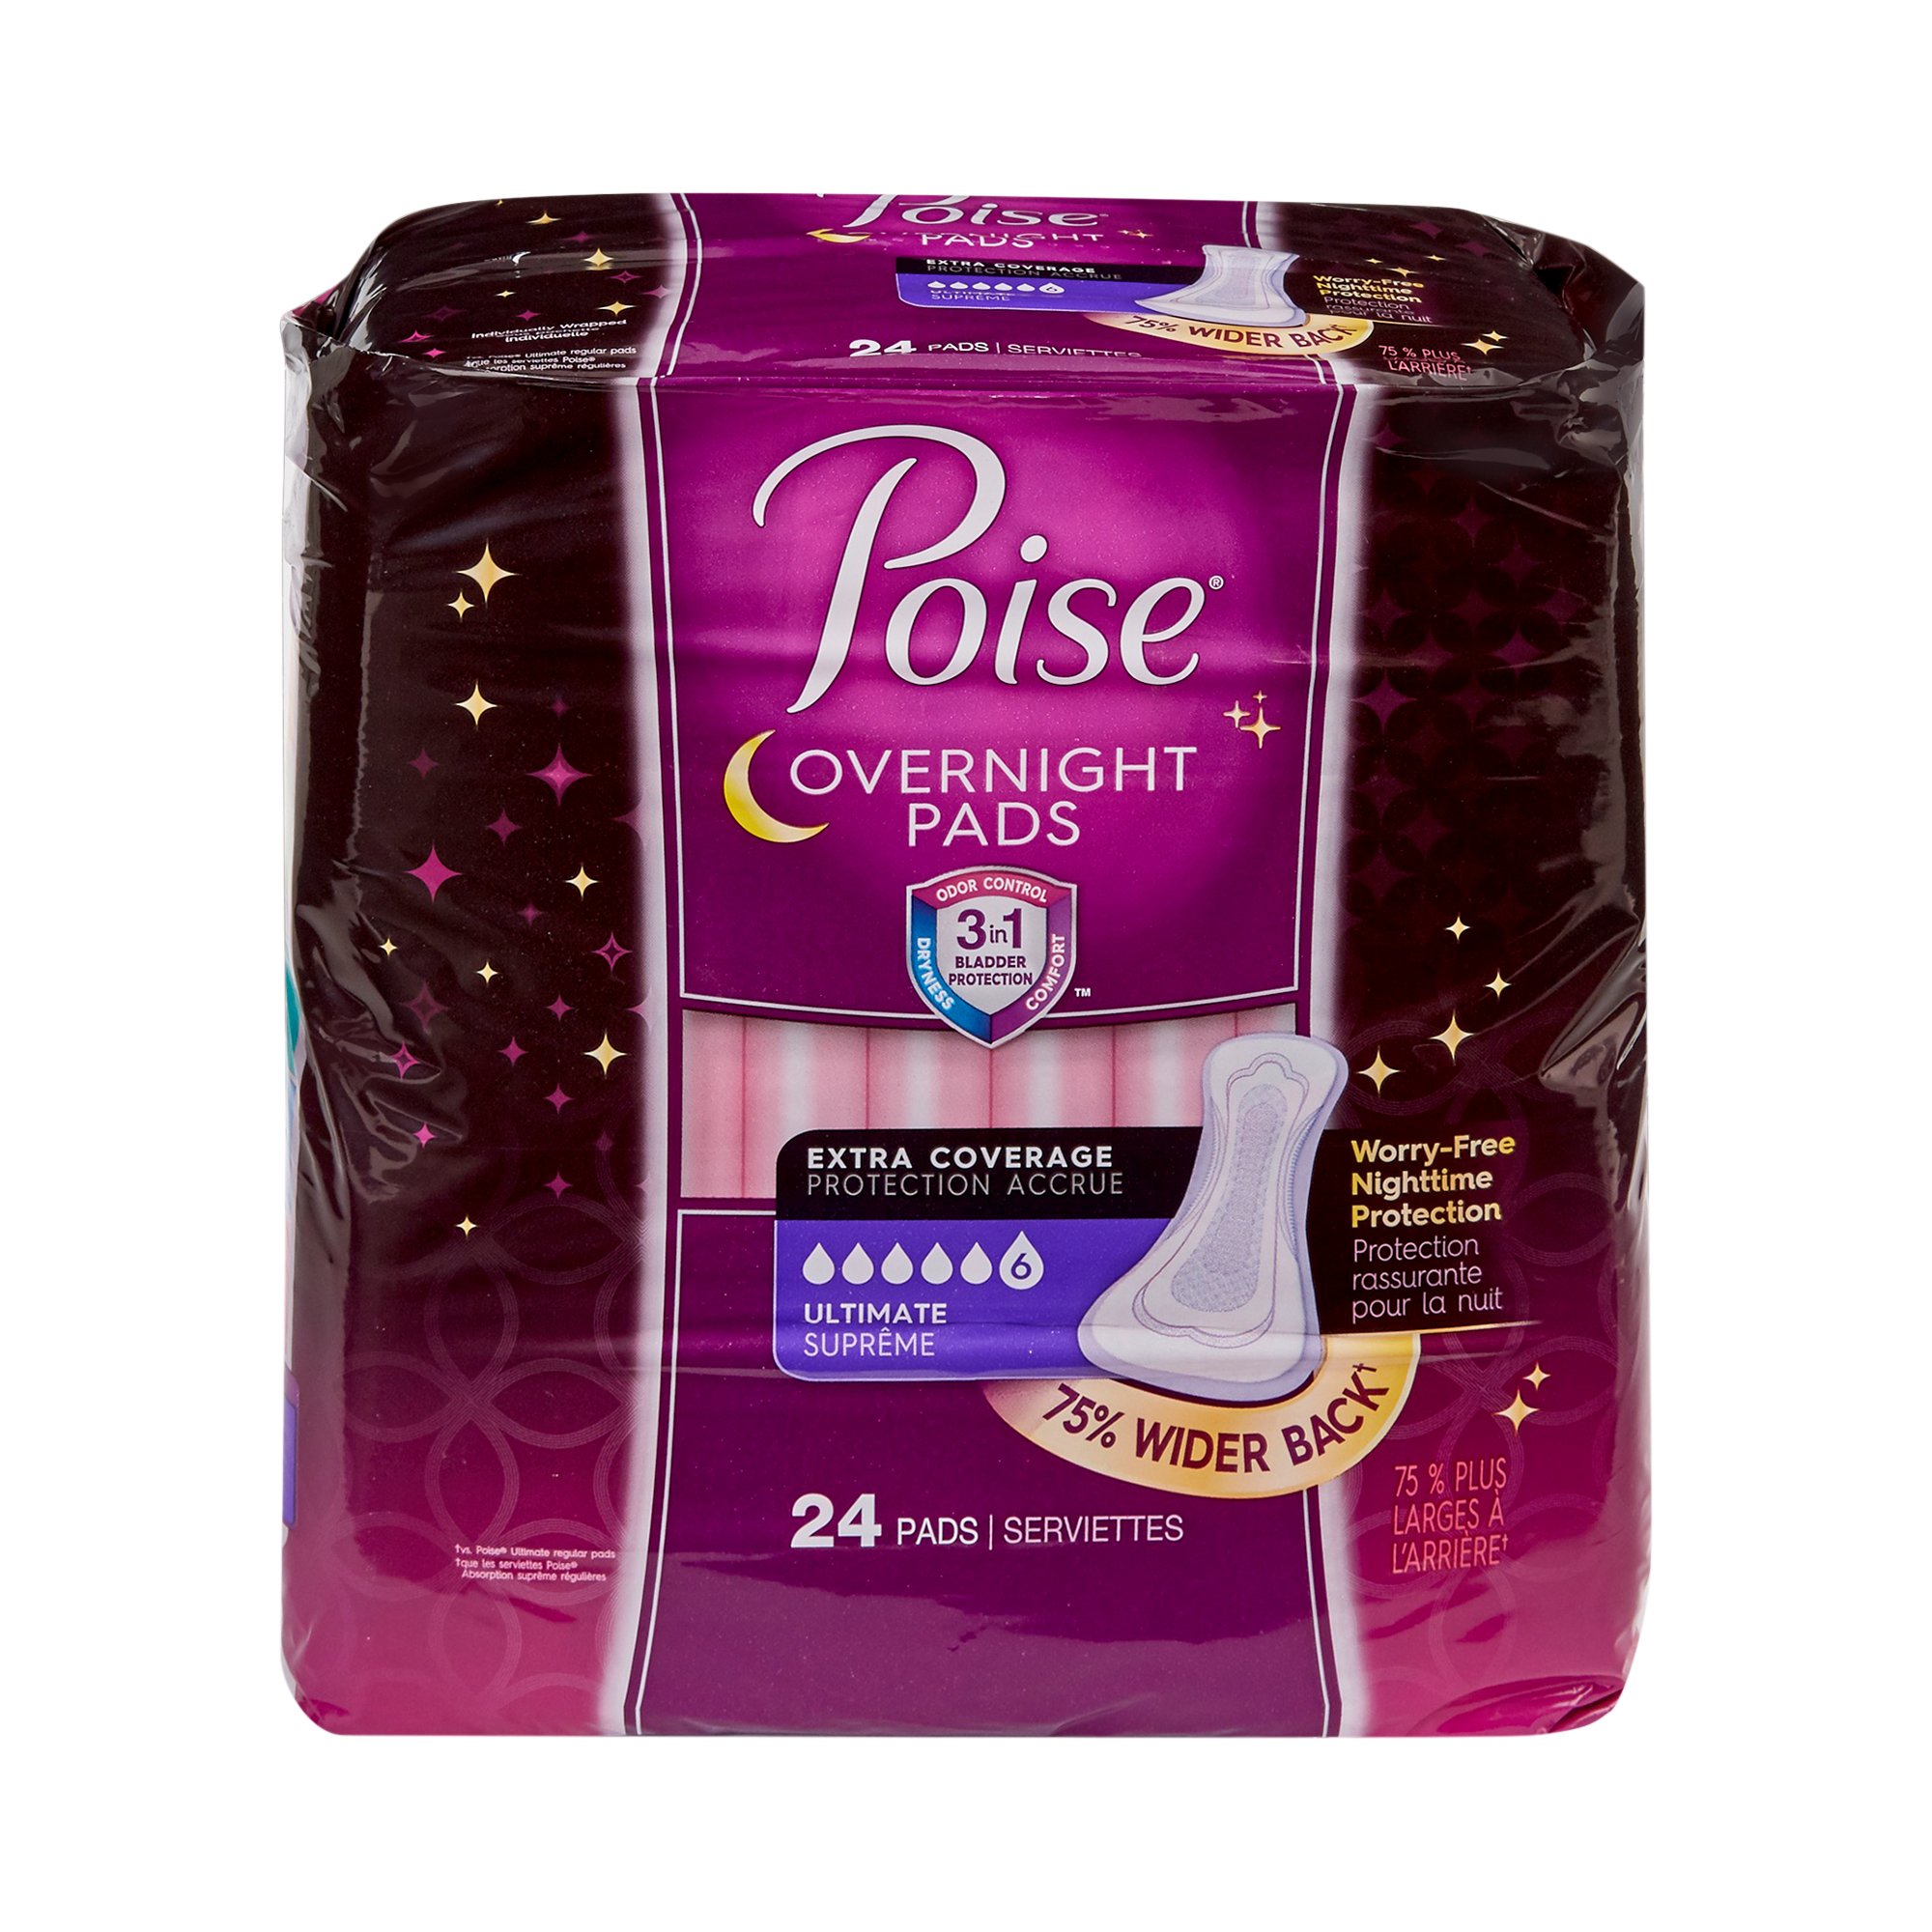 Buy Poise Overnight Incontinence Pads, Ultimate Absorbency, 75% Wider Back,  2 Packs of 24 Pads, 48 Count Total Online at Low Prices in India 